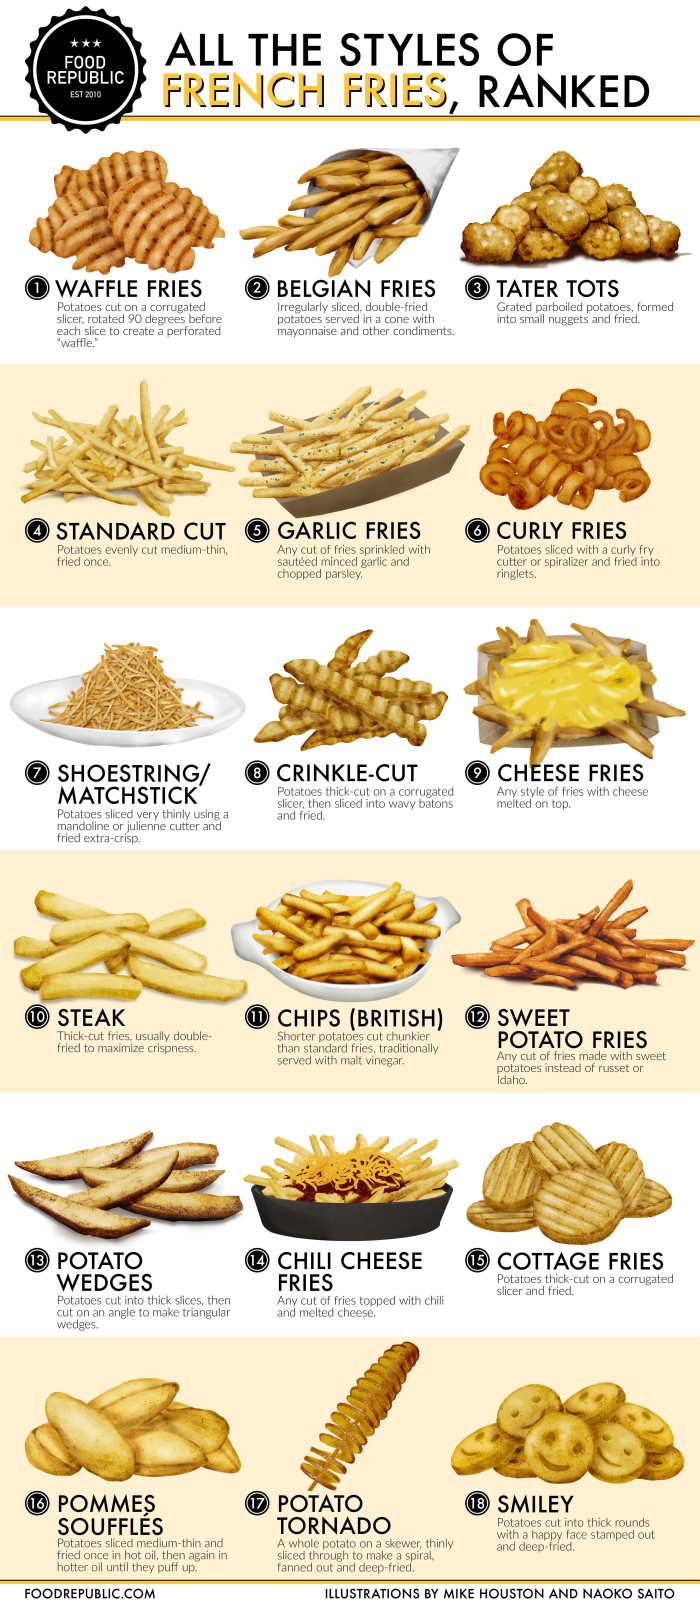 All The Styles Of French Fries, Ranked - Food Republic